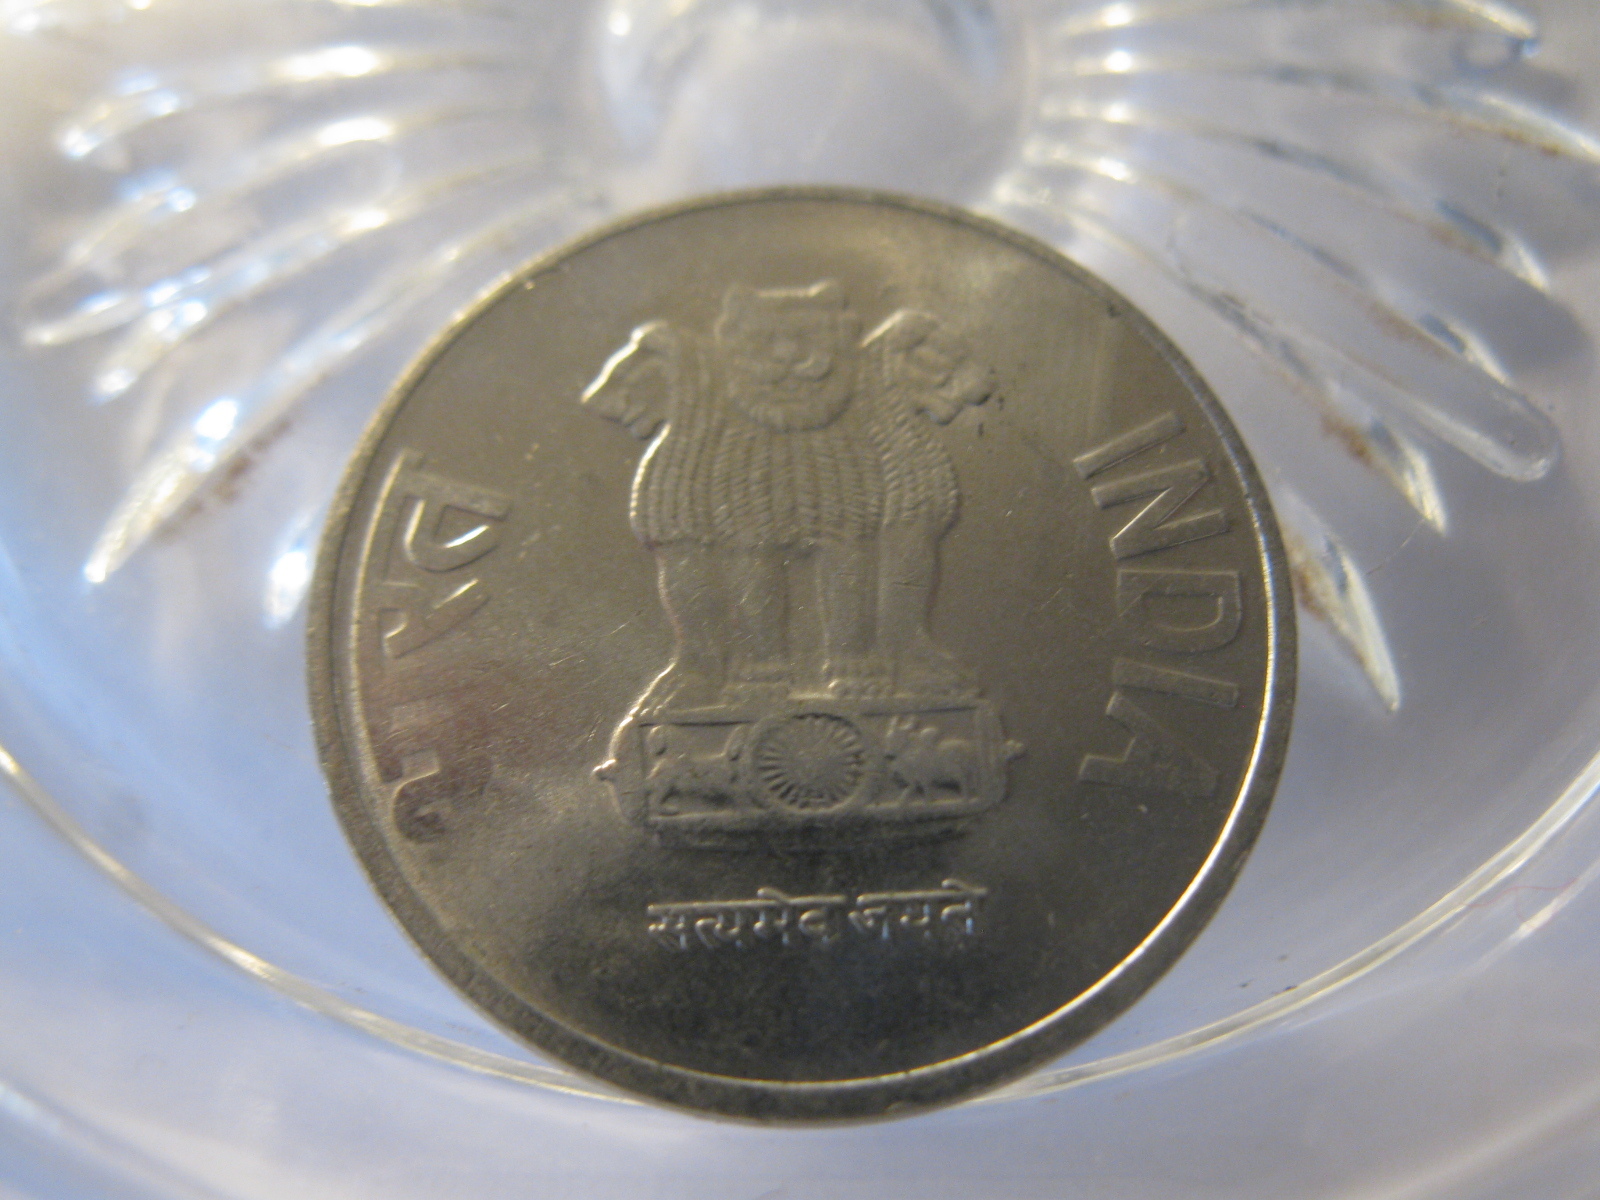 Primary image for (FC-367) 2012 India: 2 Rupees - Partial Grease Error